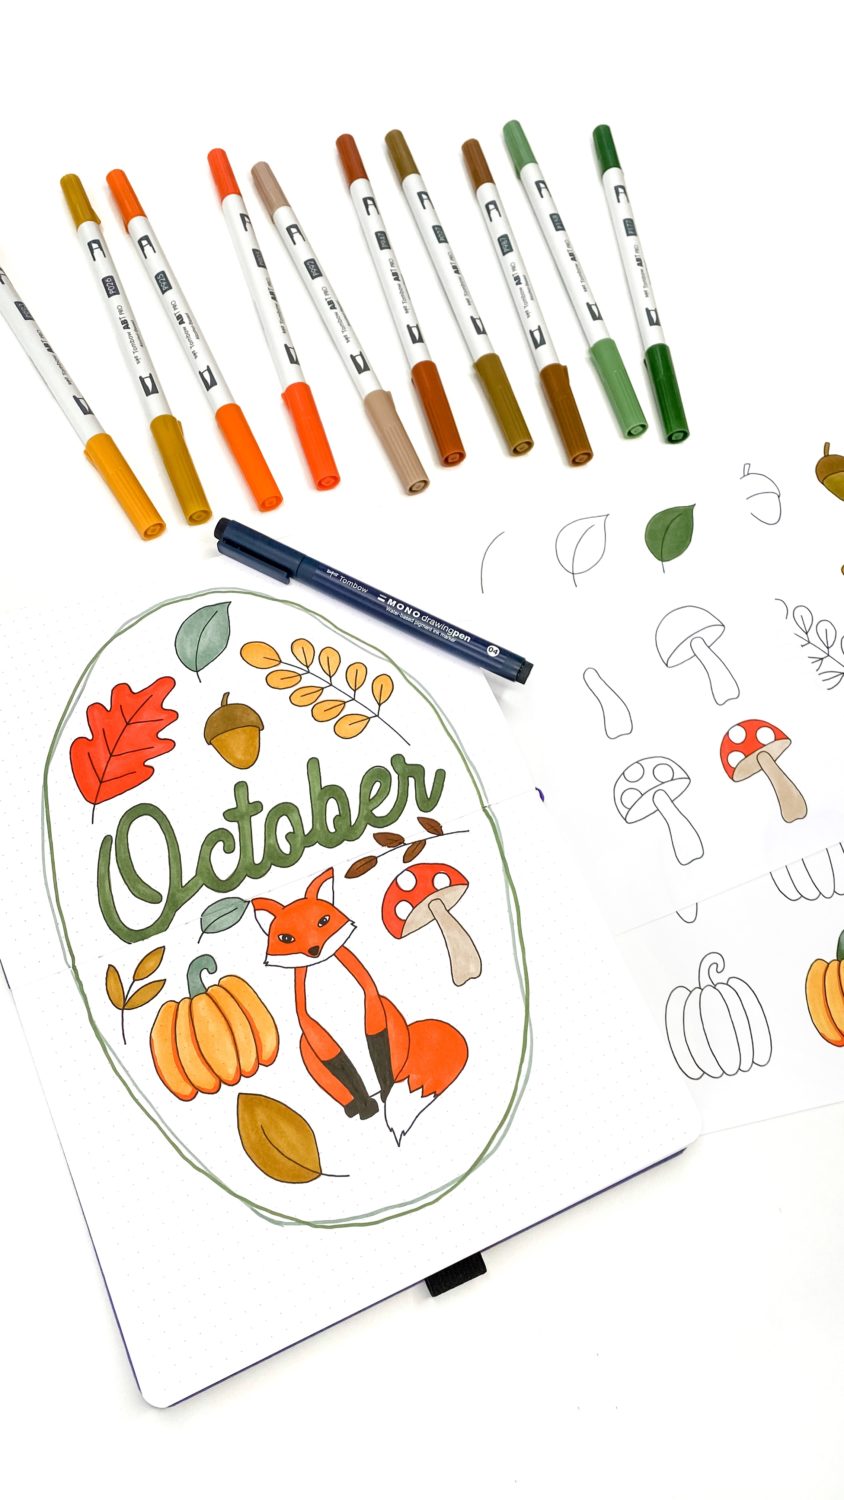 Simple Drawing Idea for your Planner - Tombow USA Blog